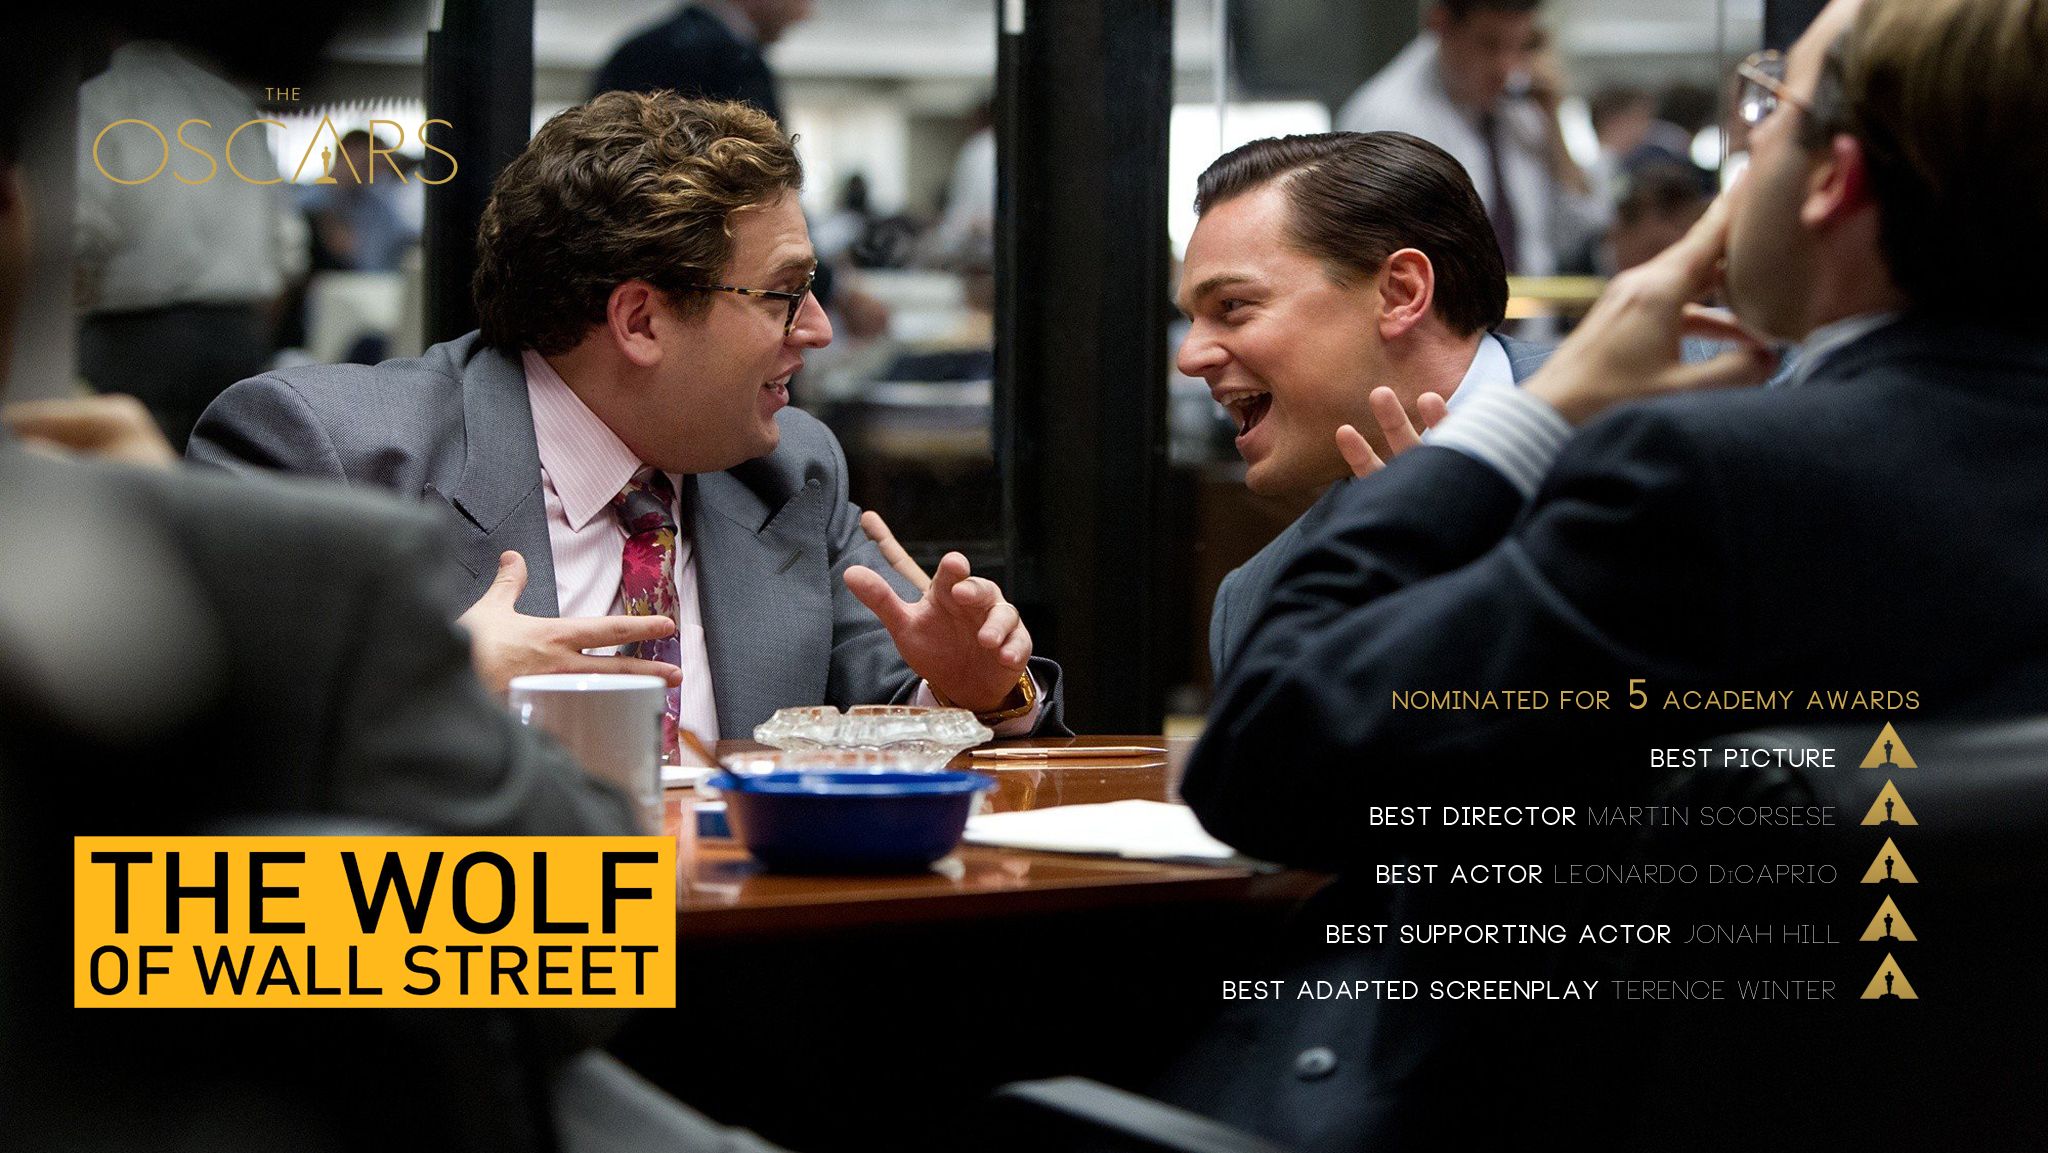 The Wolf of Wall Street nominated for 5 Academy Awards